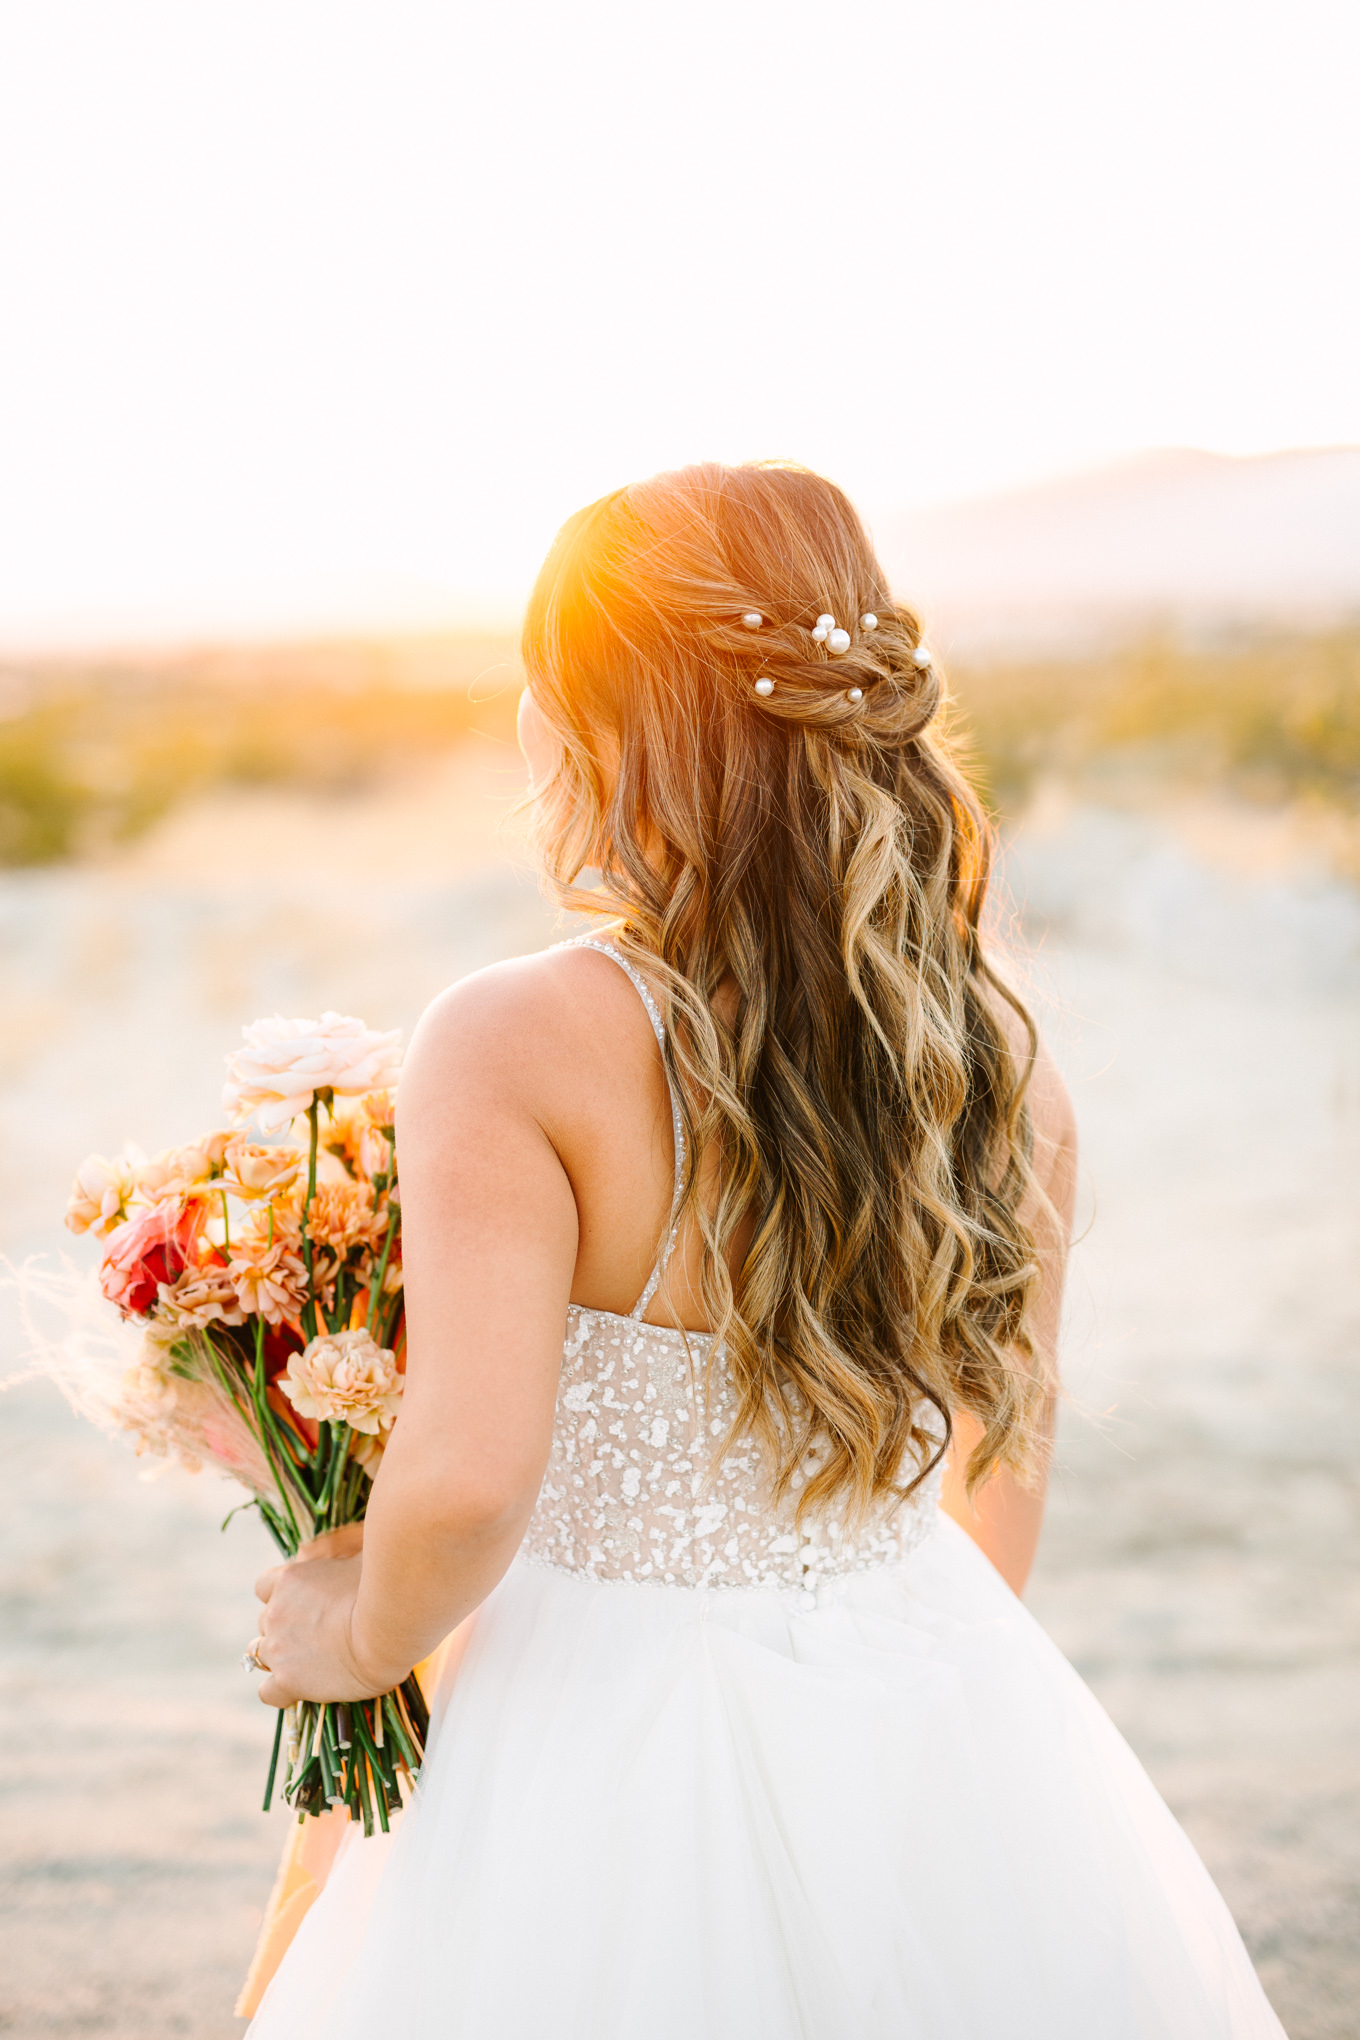 Bridal half updo with pearls | Pink and orange Lautner Compound wedding | Colorful Palm Springs wedding photography | #palmspringsphotographer #palmspringswedding #lautnercompound #southerncaliforniawedding  Source: Mary Costa Photography | Los Angeles